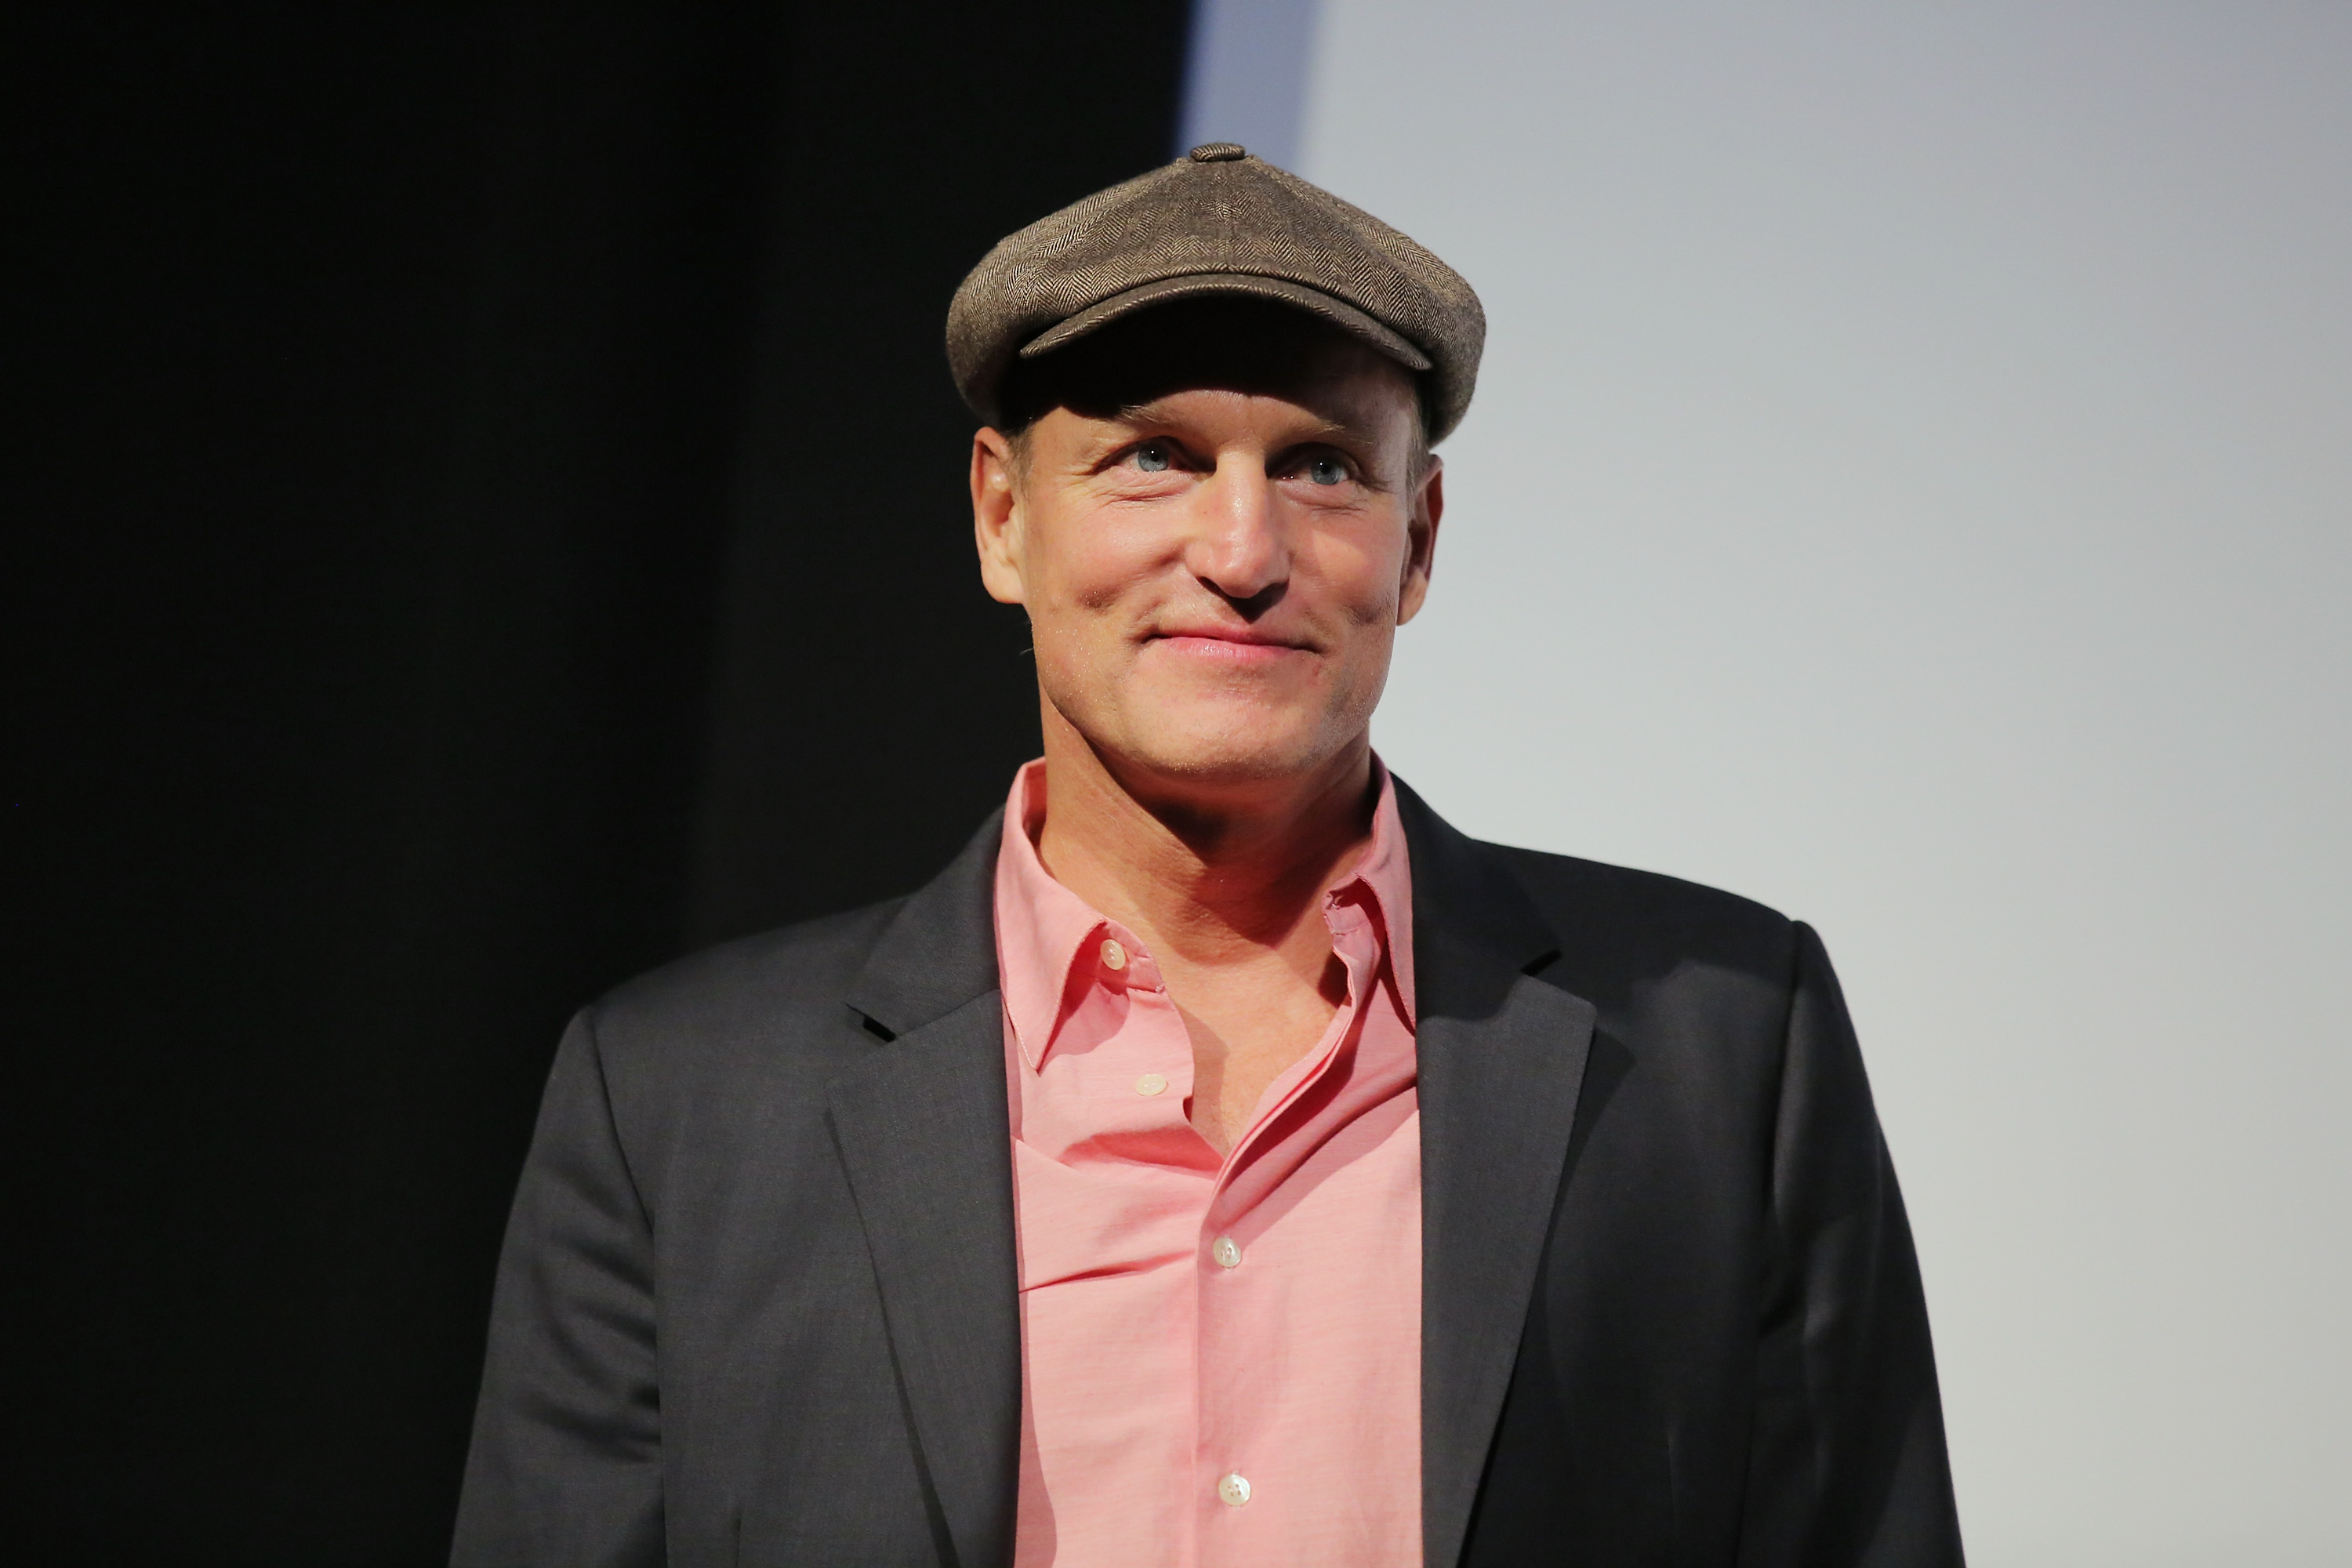 Actor Woody Harrelson onstage during the intro at the 2016 Toronto International Film Festival Premiere of "LBJ" at Roy Thomson Hall on September 15, 2016 in Toronto, Canada. (J. Countess/Getty Images)